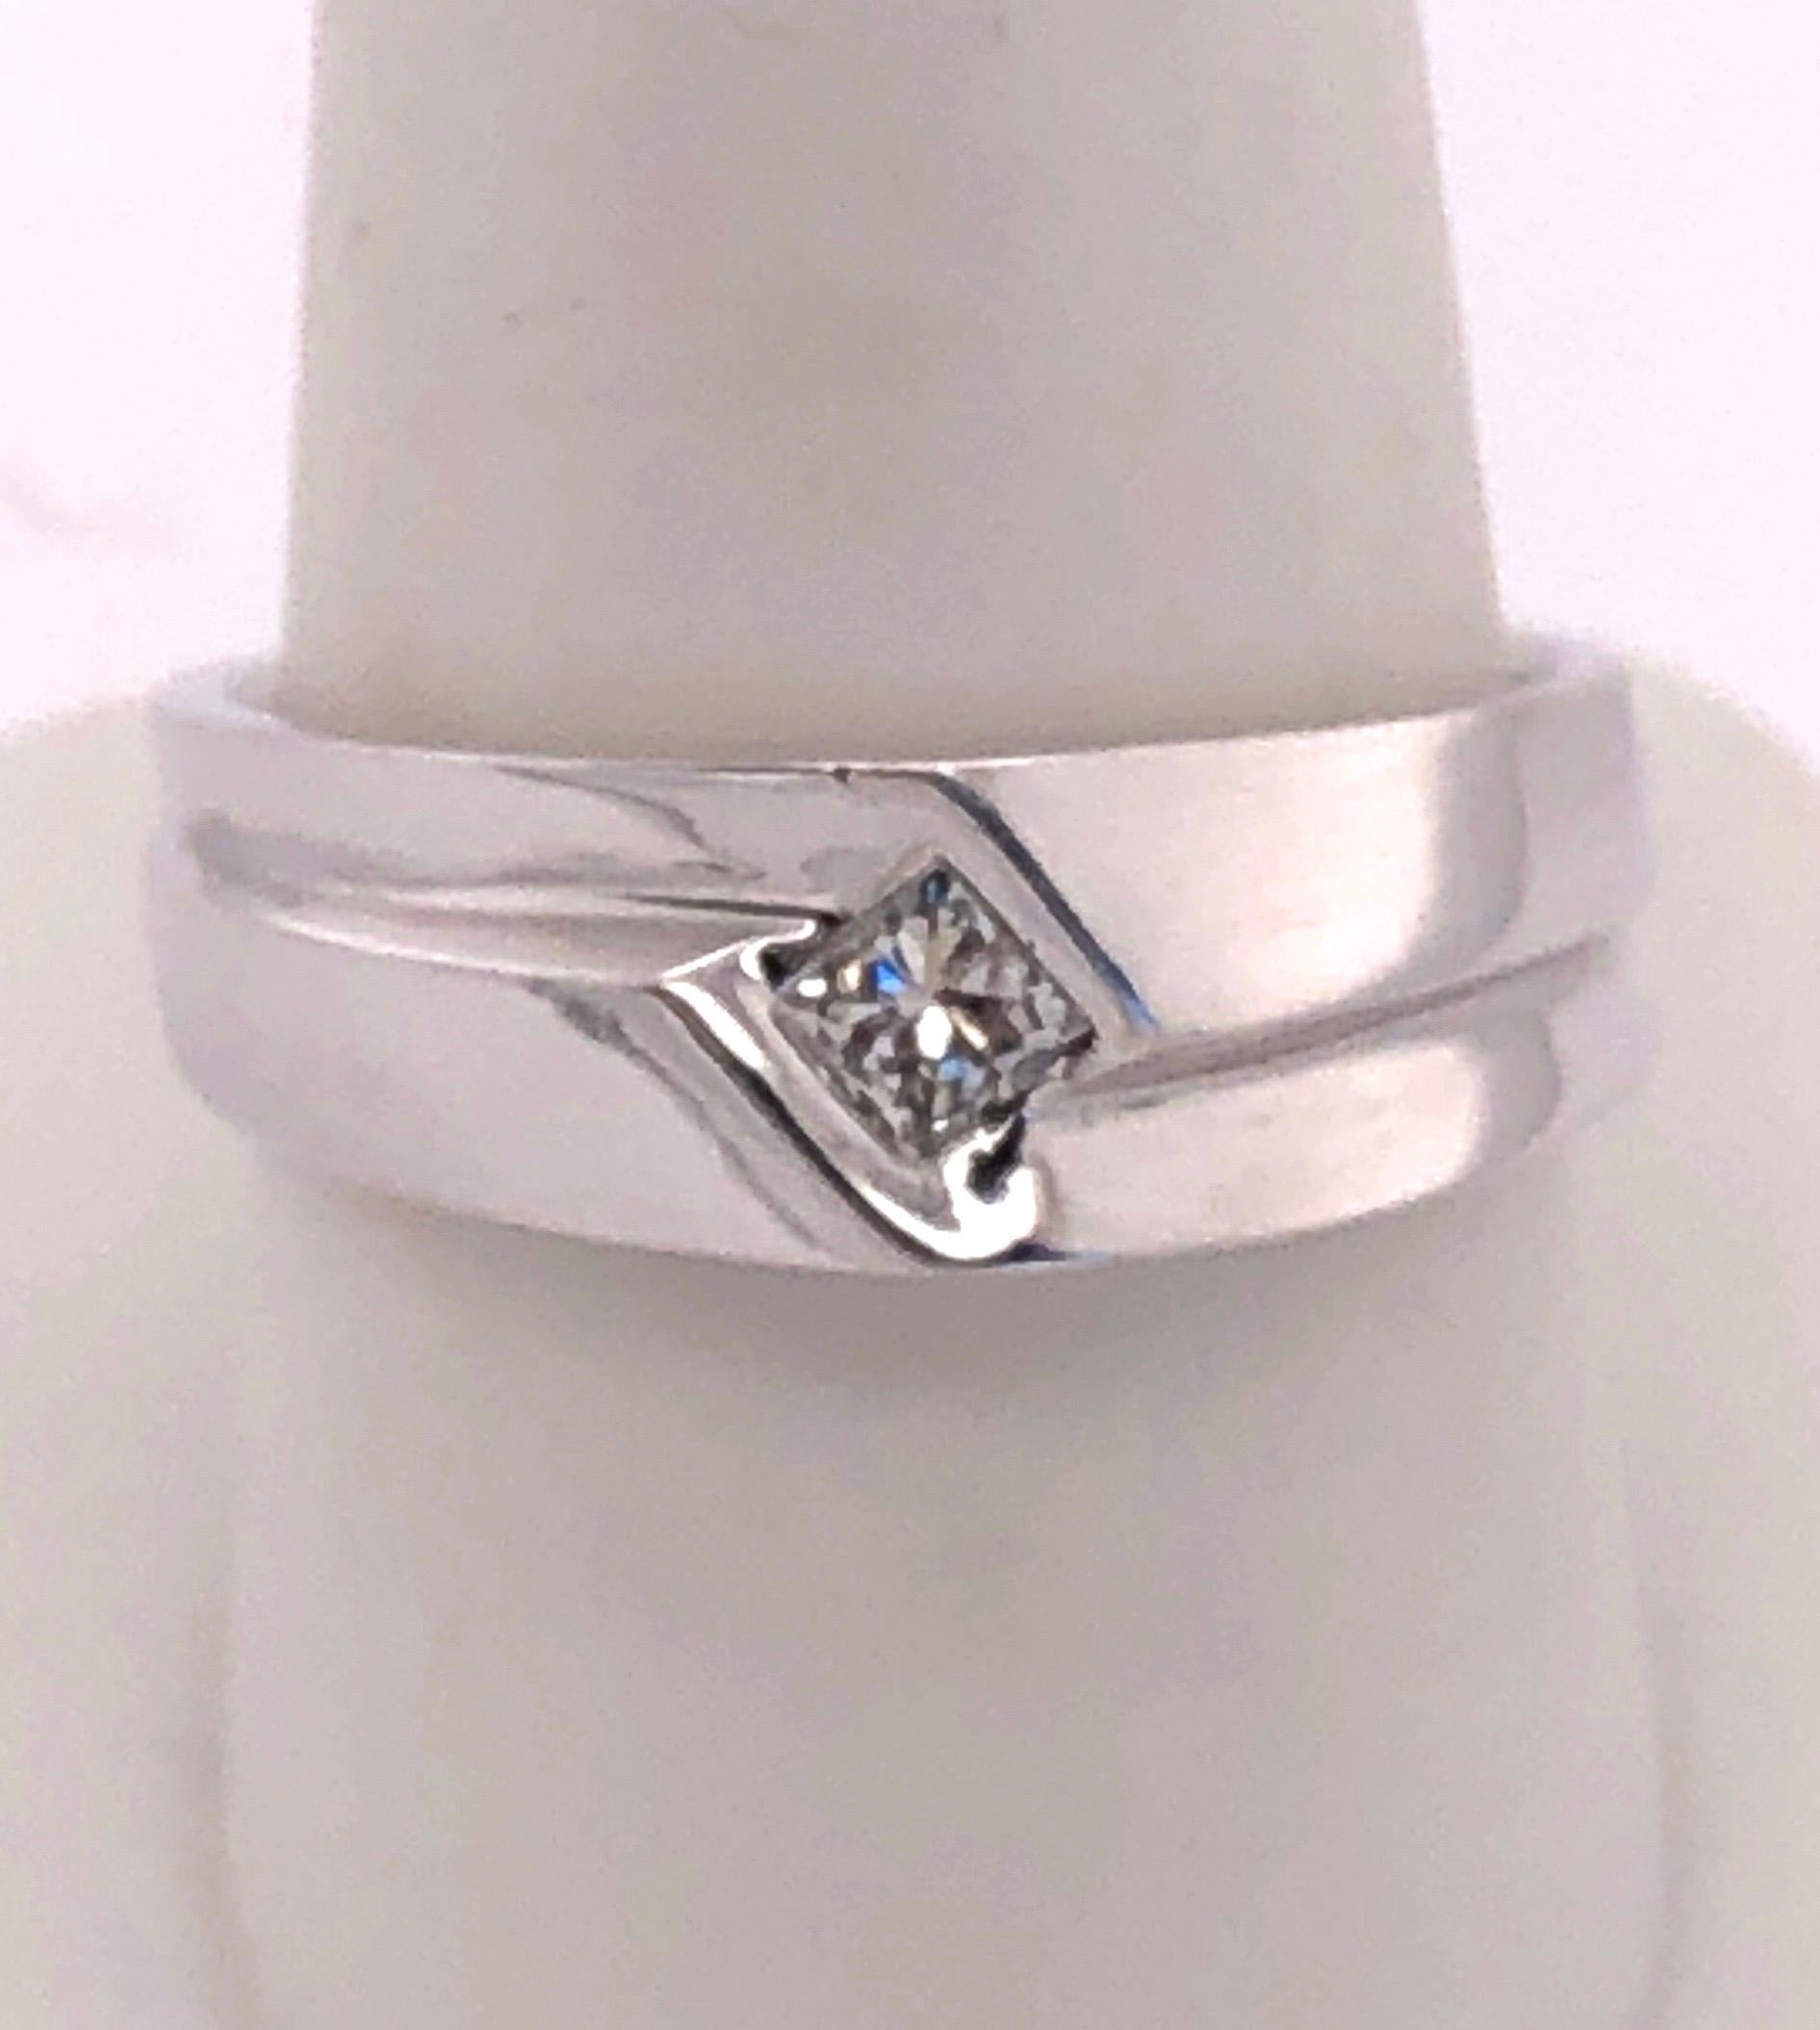 14Kt White Gold Contemporary Ring with Diamond 0.25 Total Diamond Weight
Size 9.5 with 9 grams total weight.